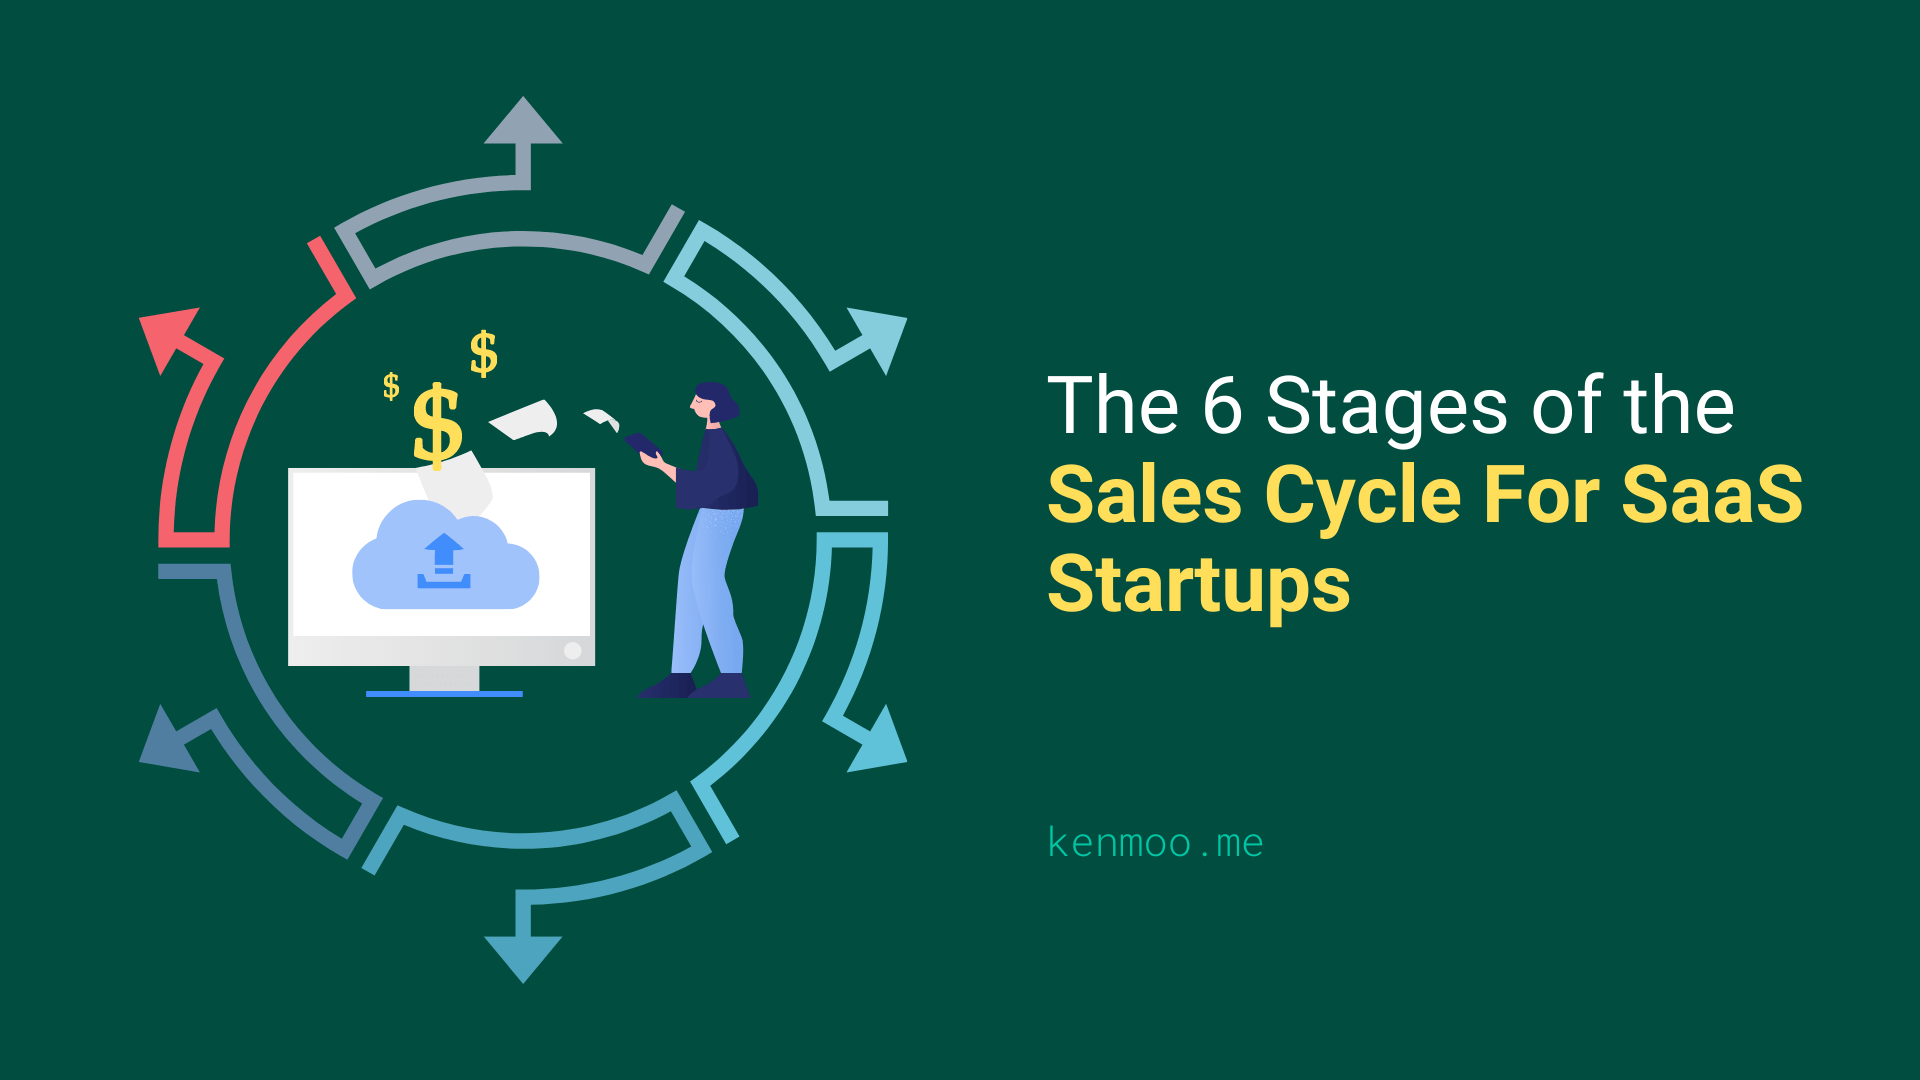 The 6 Stages of the Sales Cycle For SaaS Startups